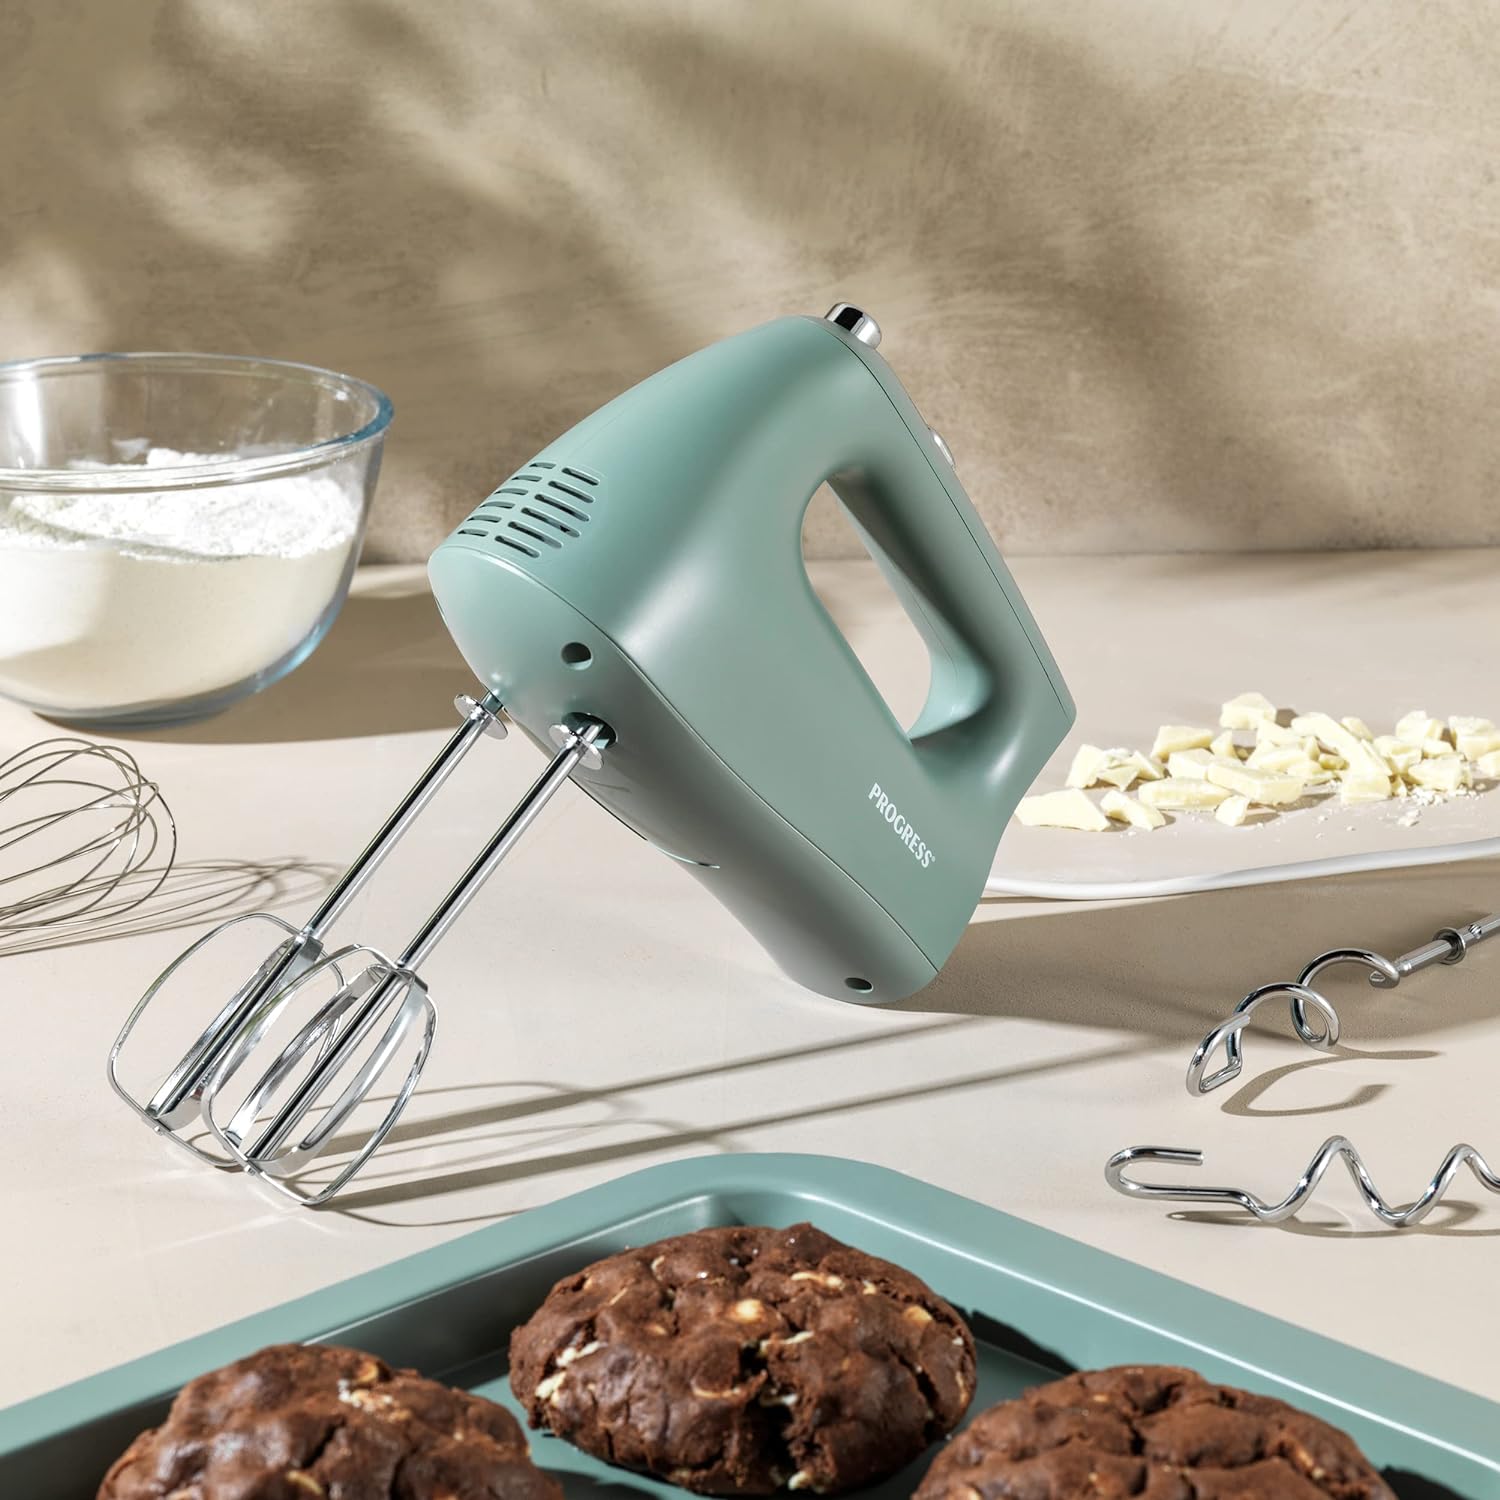 Progress EK5233PTEAL Go Bake! Hand Mixer – Electric Baking Whisk with 5 Speed Settings, 2 Stainless Steel Mixing Beaters & Dough Hooks, Cake Mixer with Eject Function for Easy Cleaning, 250W, Teal - Amazing Gadgets Outlet